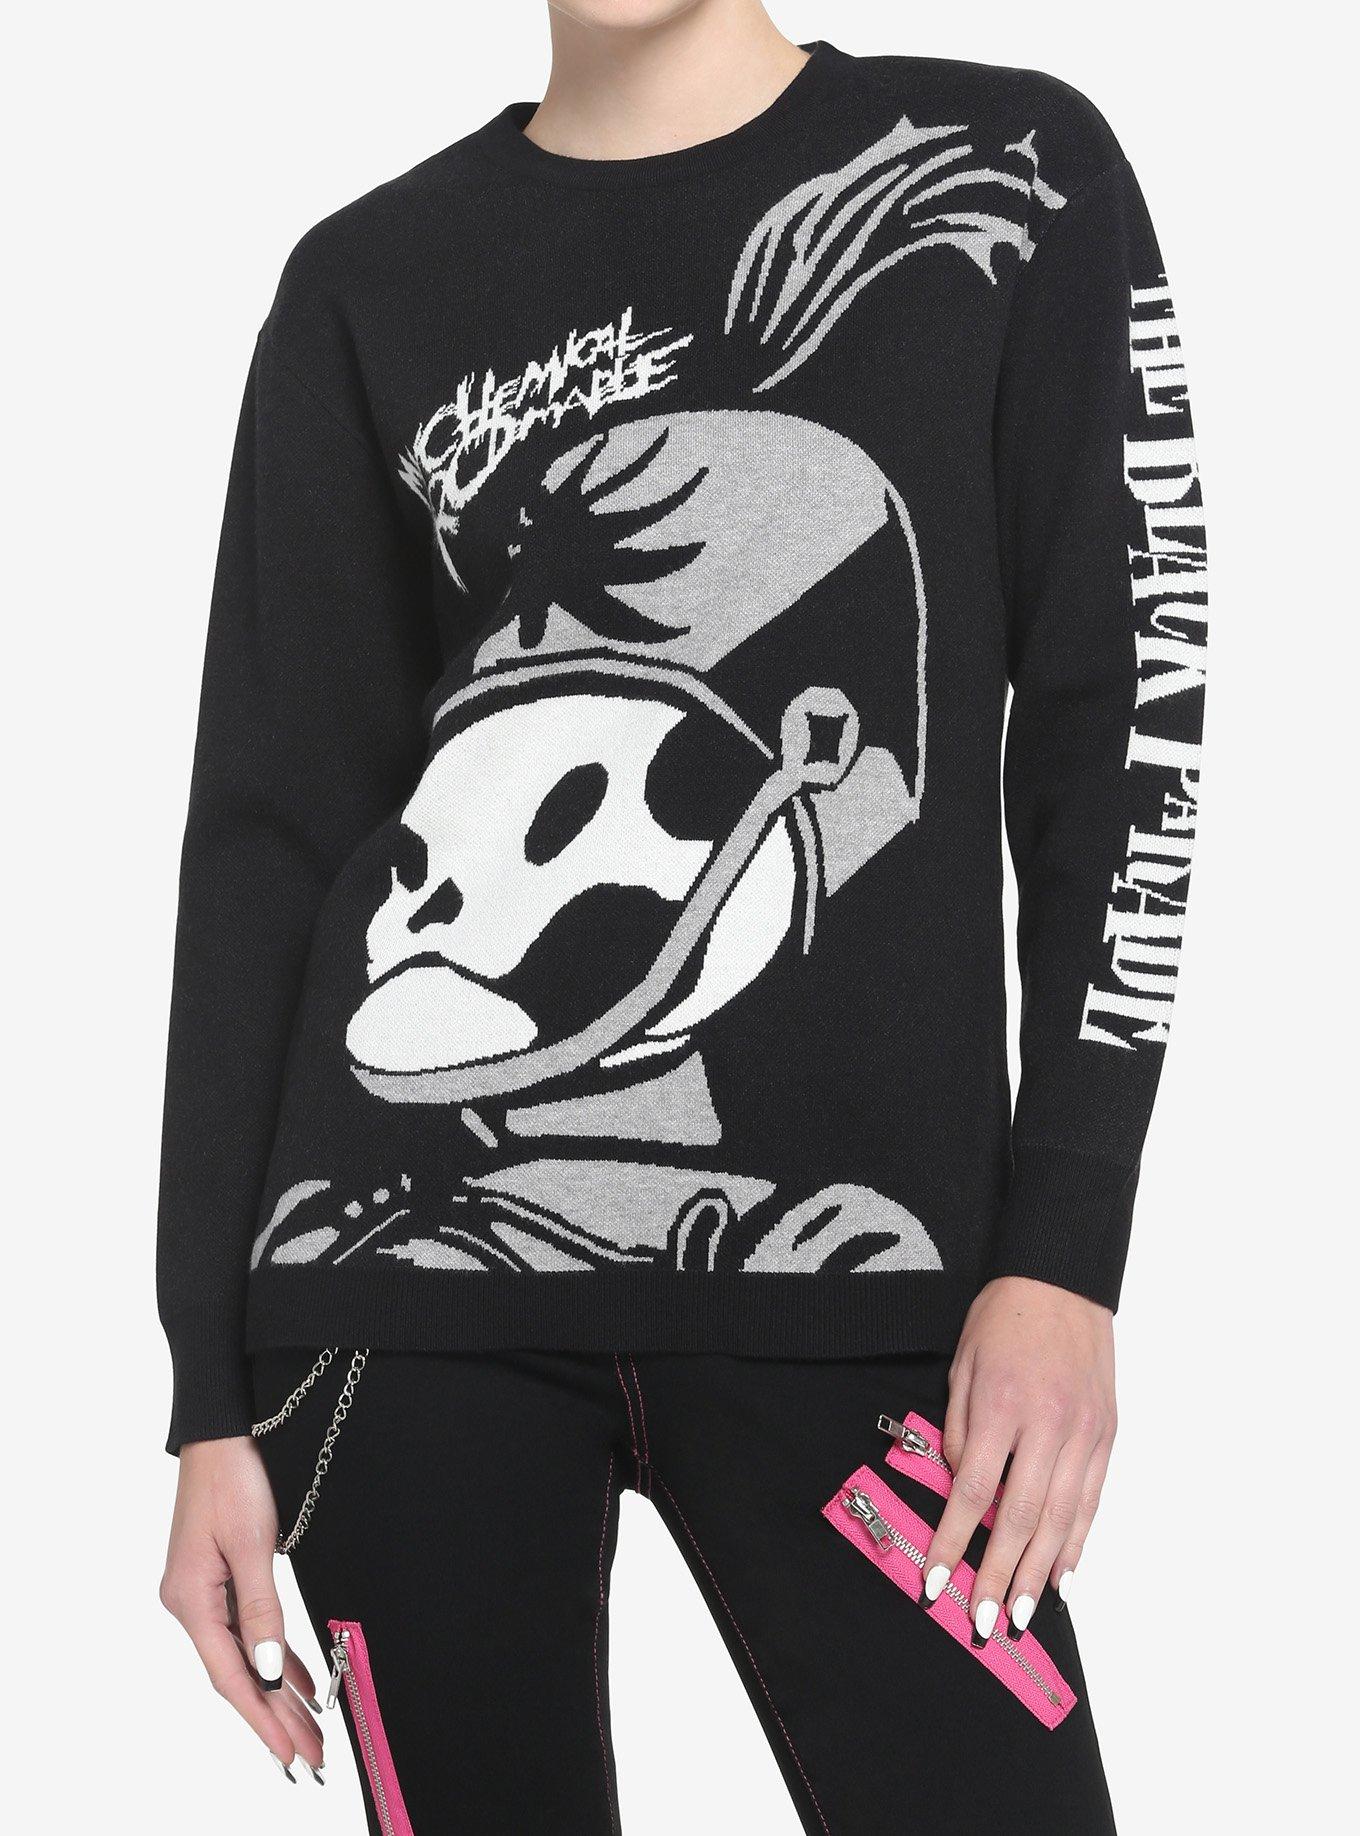 Intarsia Hot Topic My Pepe The Chemical Romance | Parade Sweater Knit Girls Black